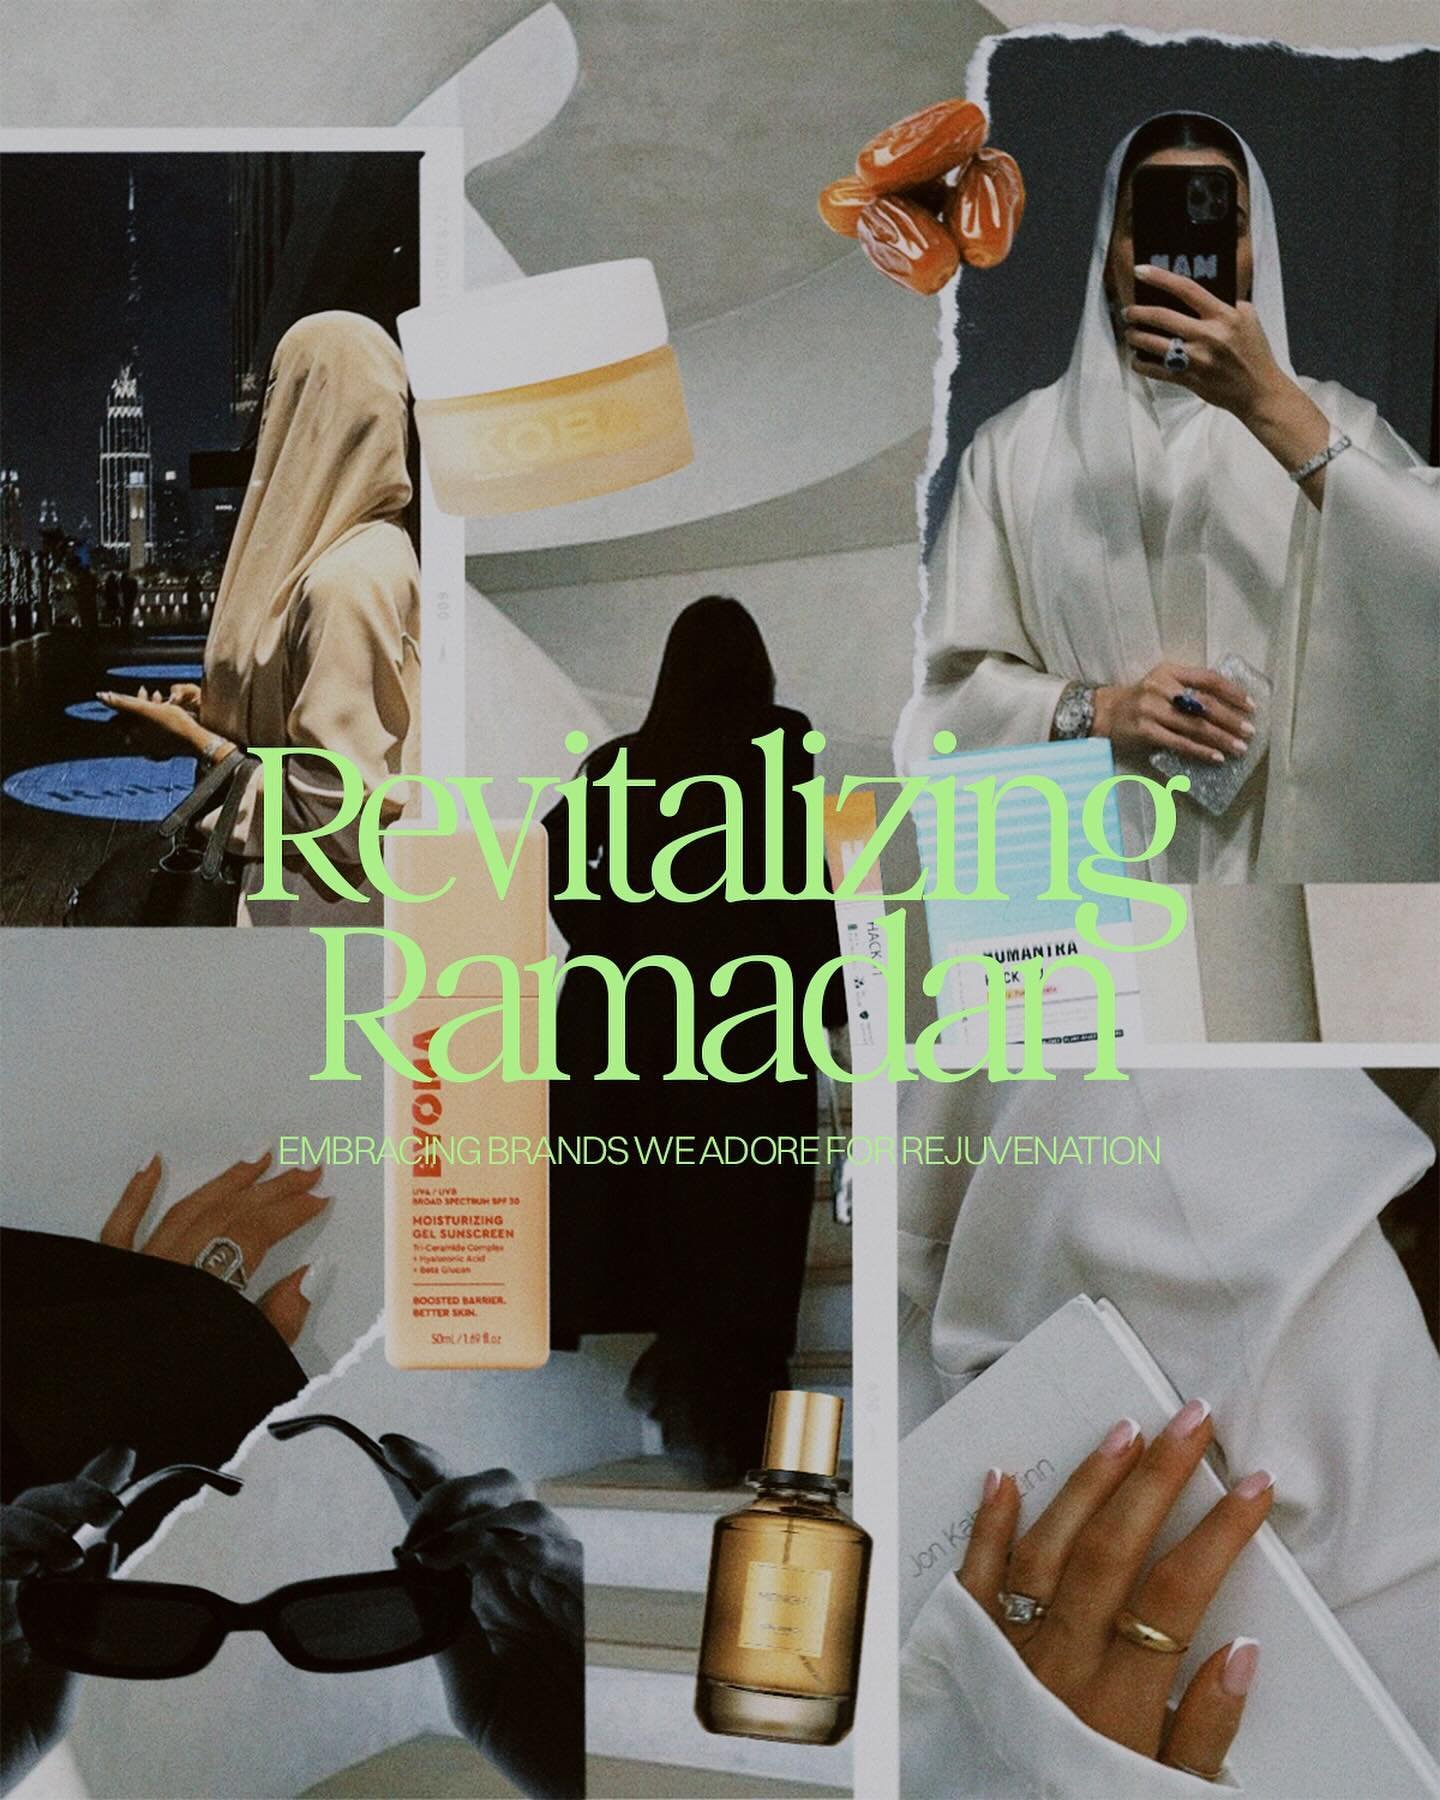 Need some inspiration on how to stay refreshed during Ramadan? ✨

No problem, we got you! 

We&rsquo;ve put together some of our favourite brands that will help keep you fresh and rejuvenated during the holy month 🌙

Don&rsquo;t worry we&rsquo;ve pi